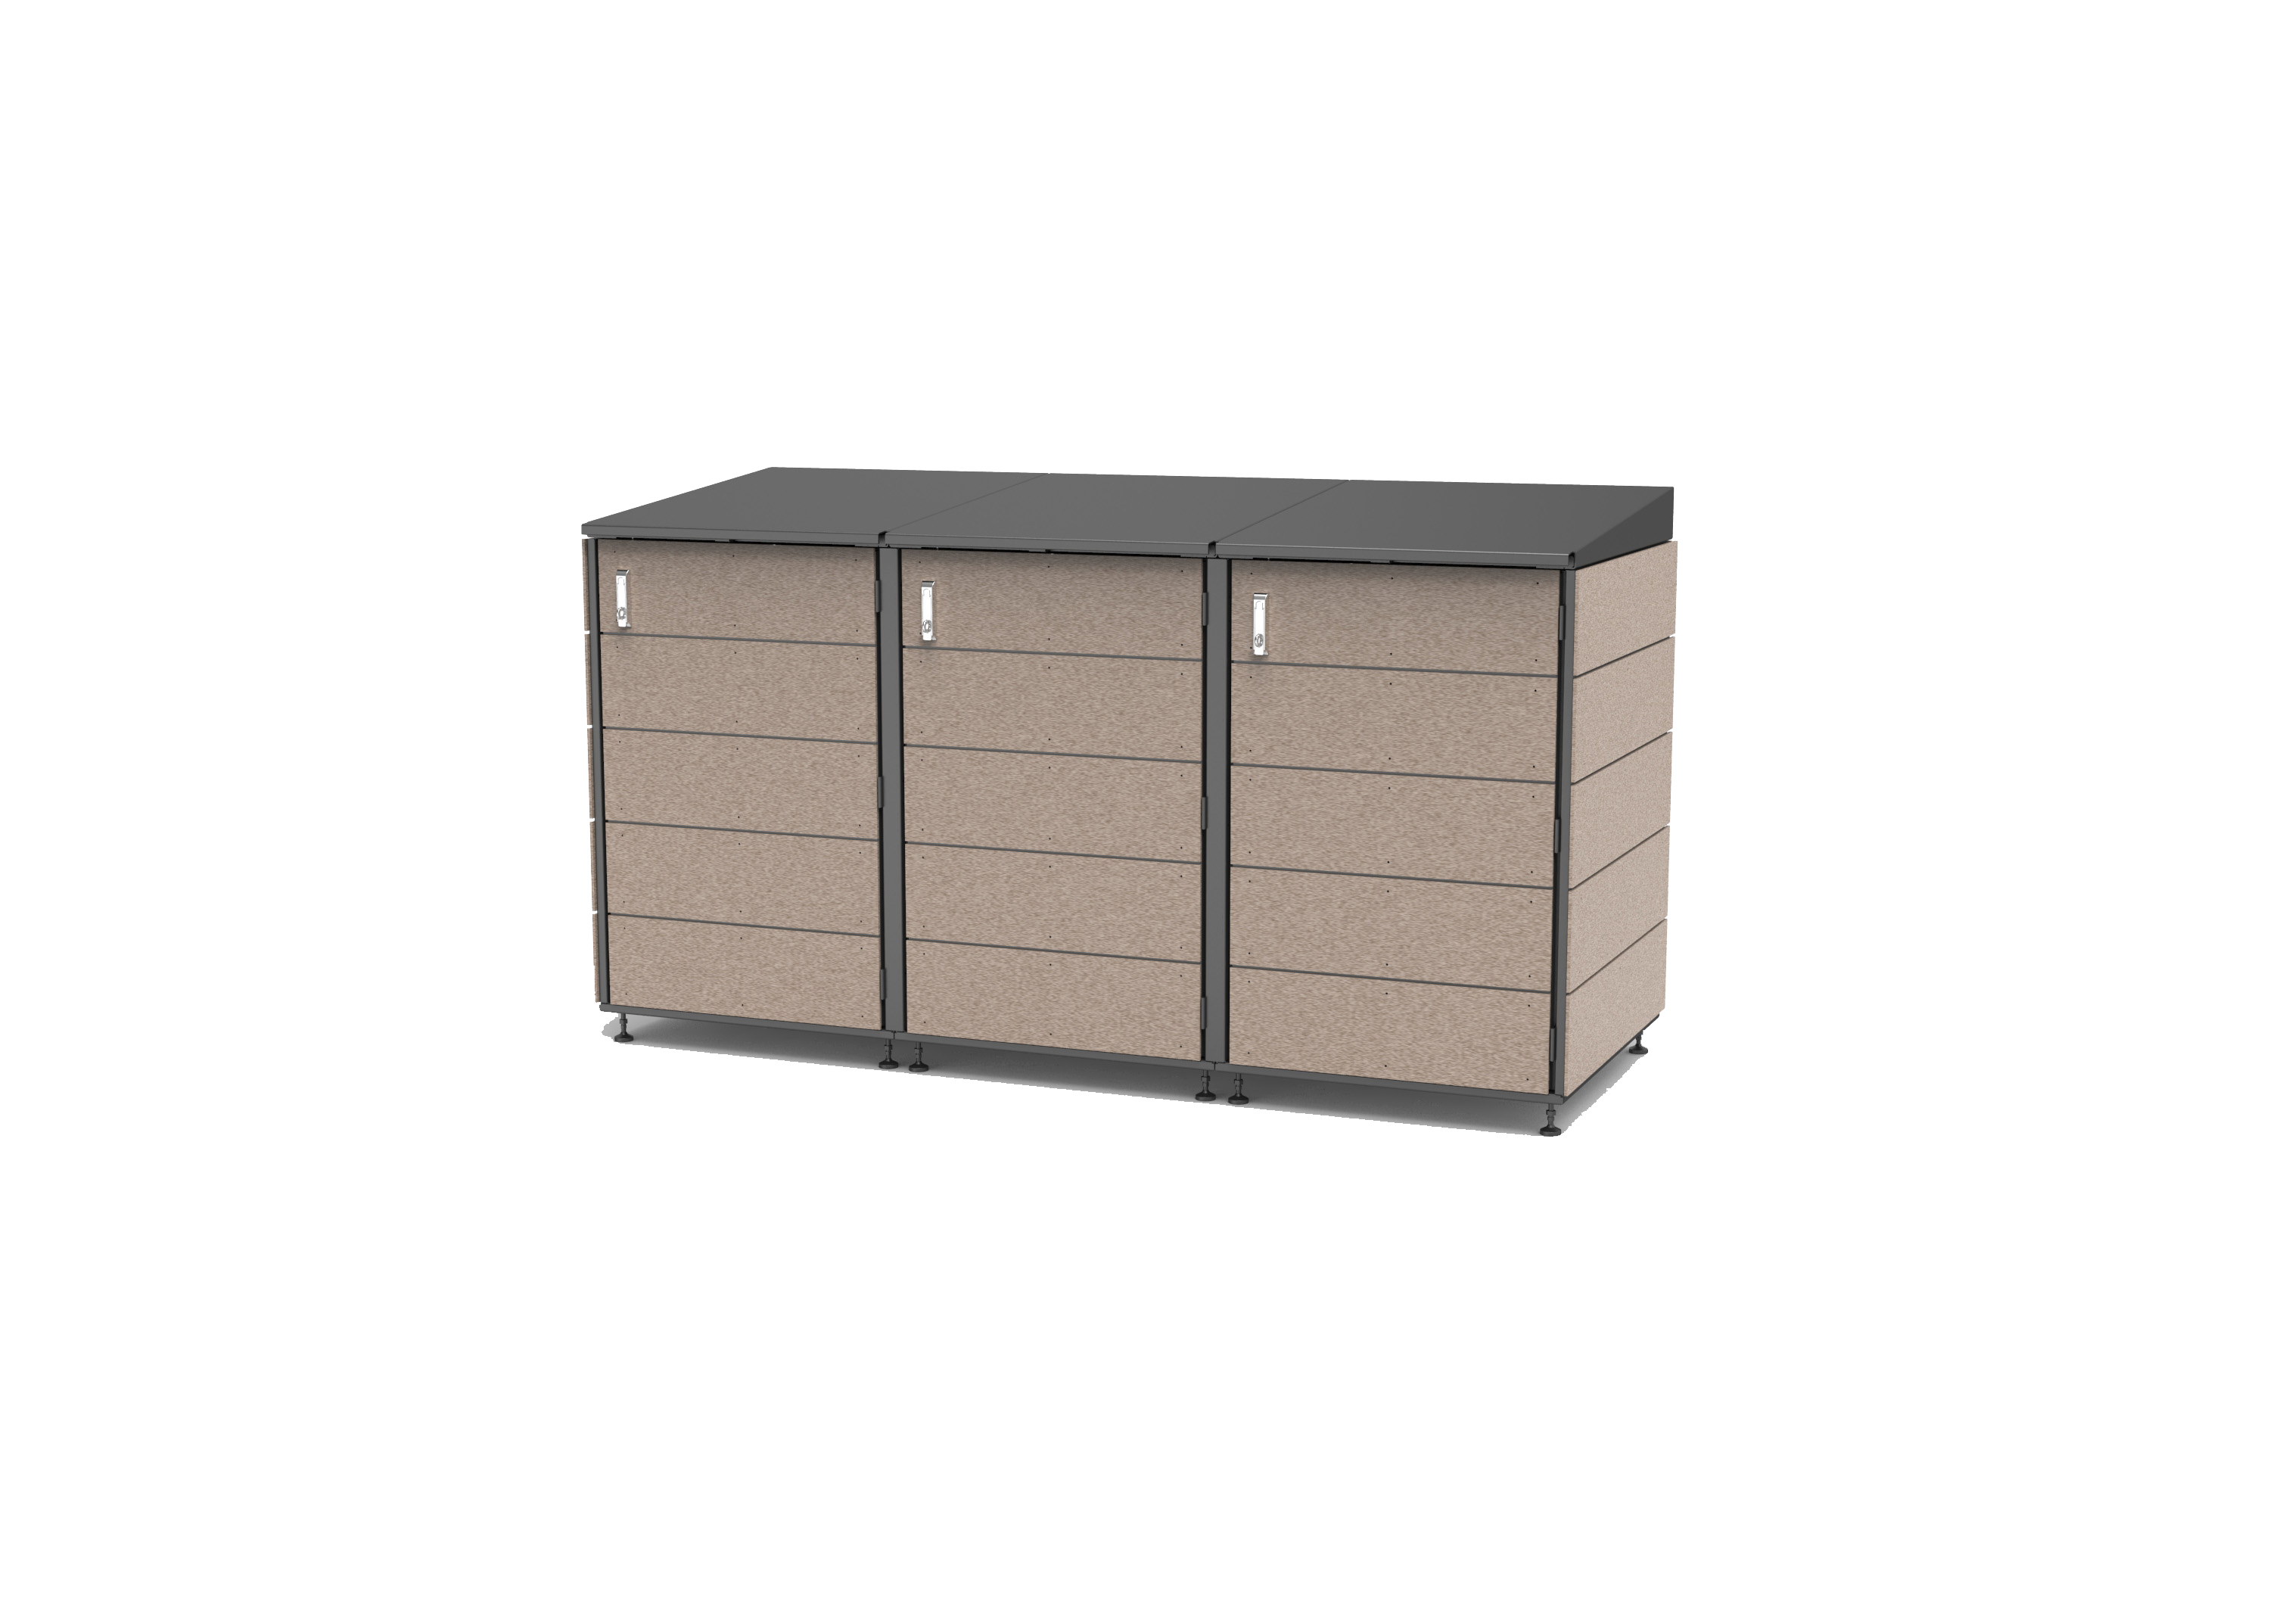 Rubbermaid 5 ft. x 2 ft. 2 in. x 2 ft. 4 in. x L Deck Box with